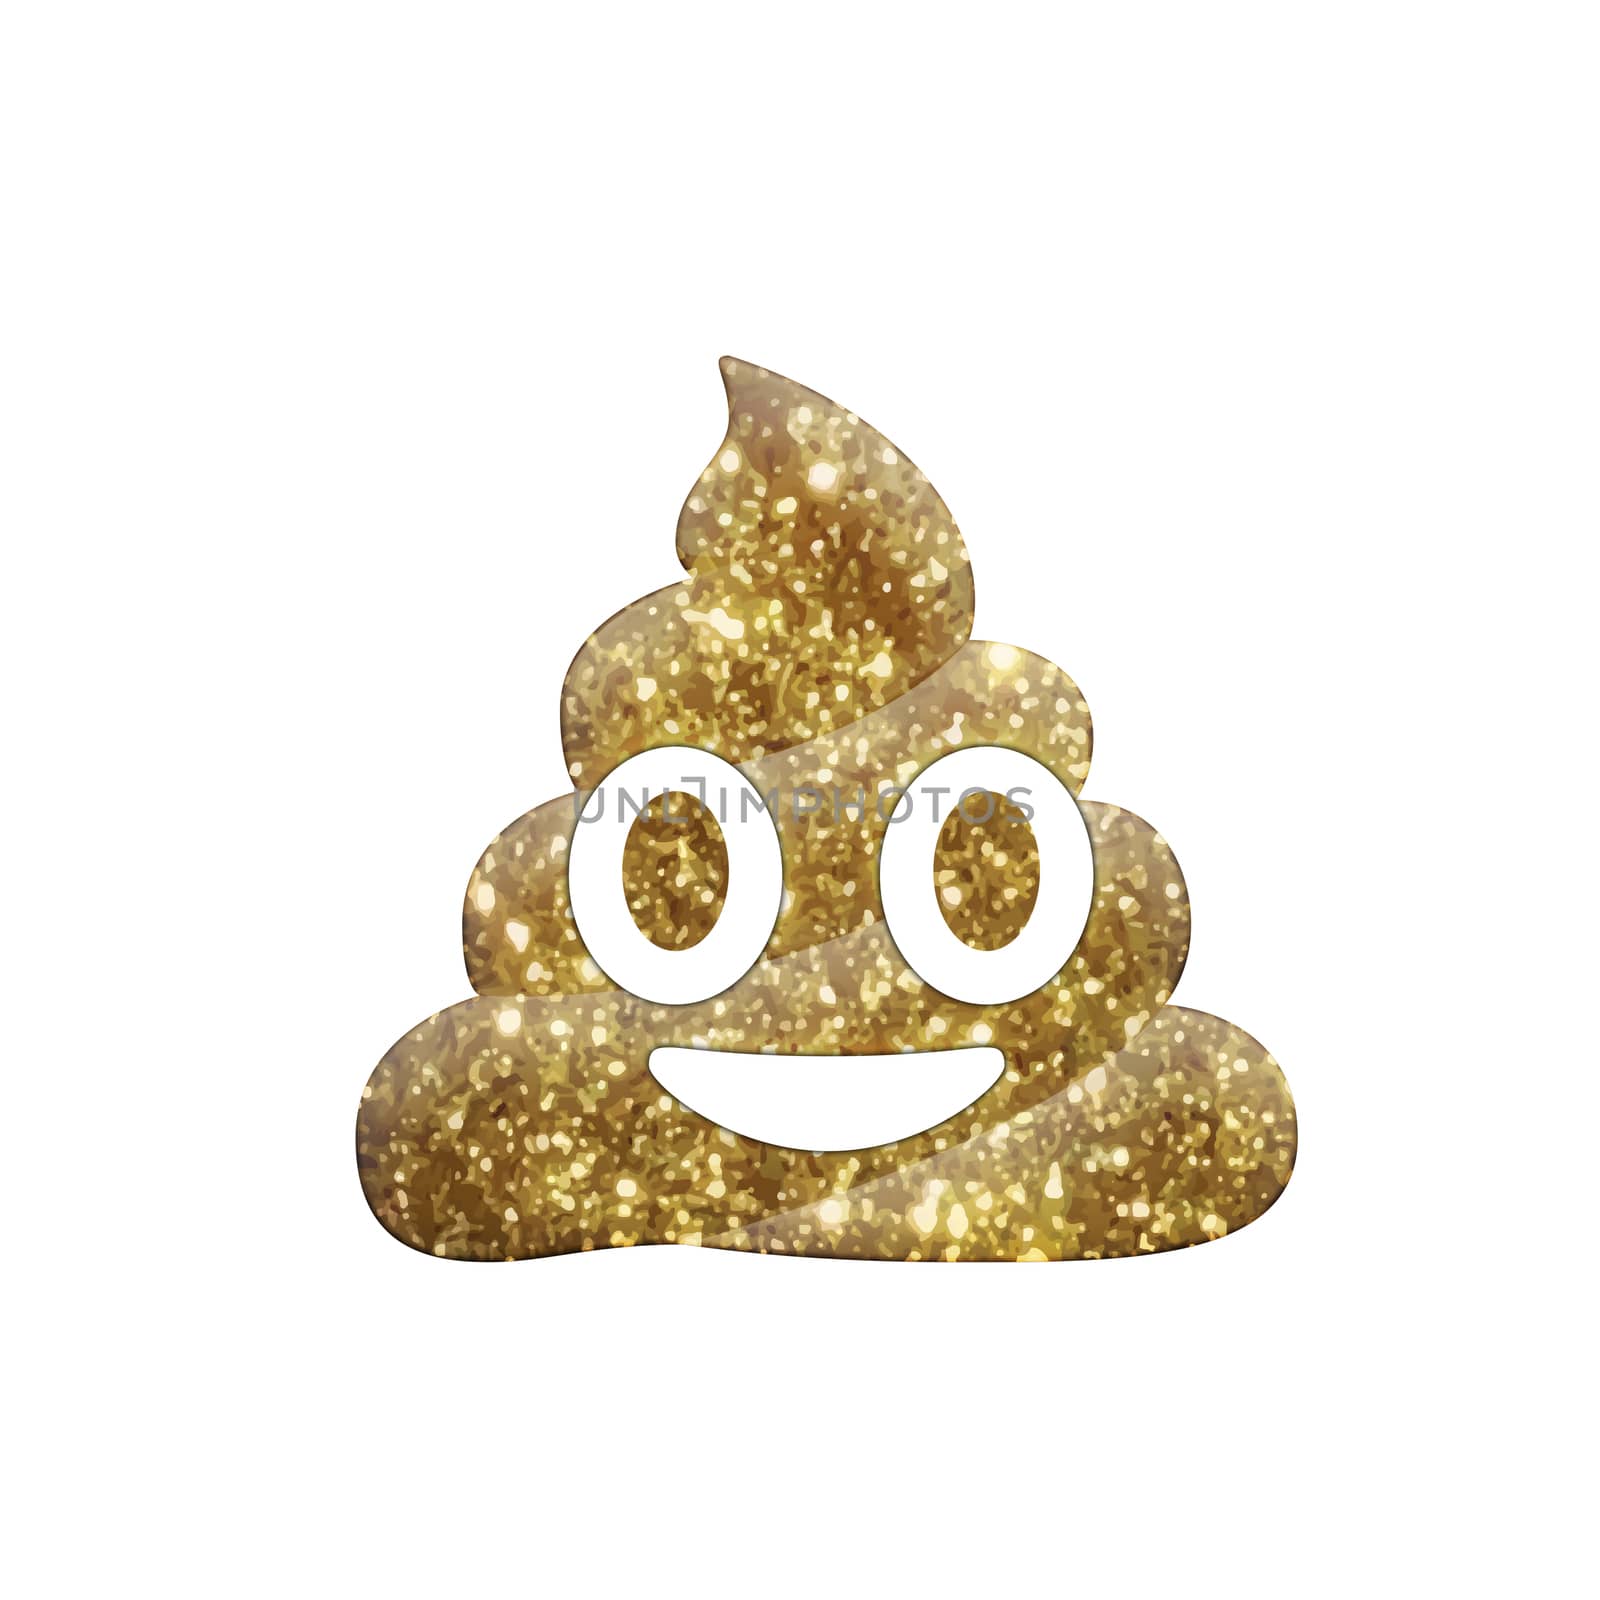 Golden glitter dung with eye and mouth icon by cougarsan